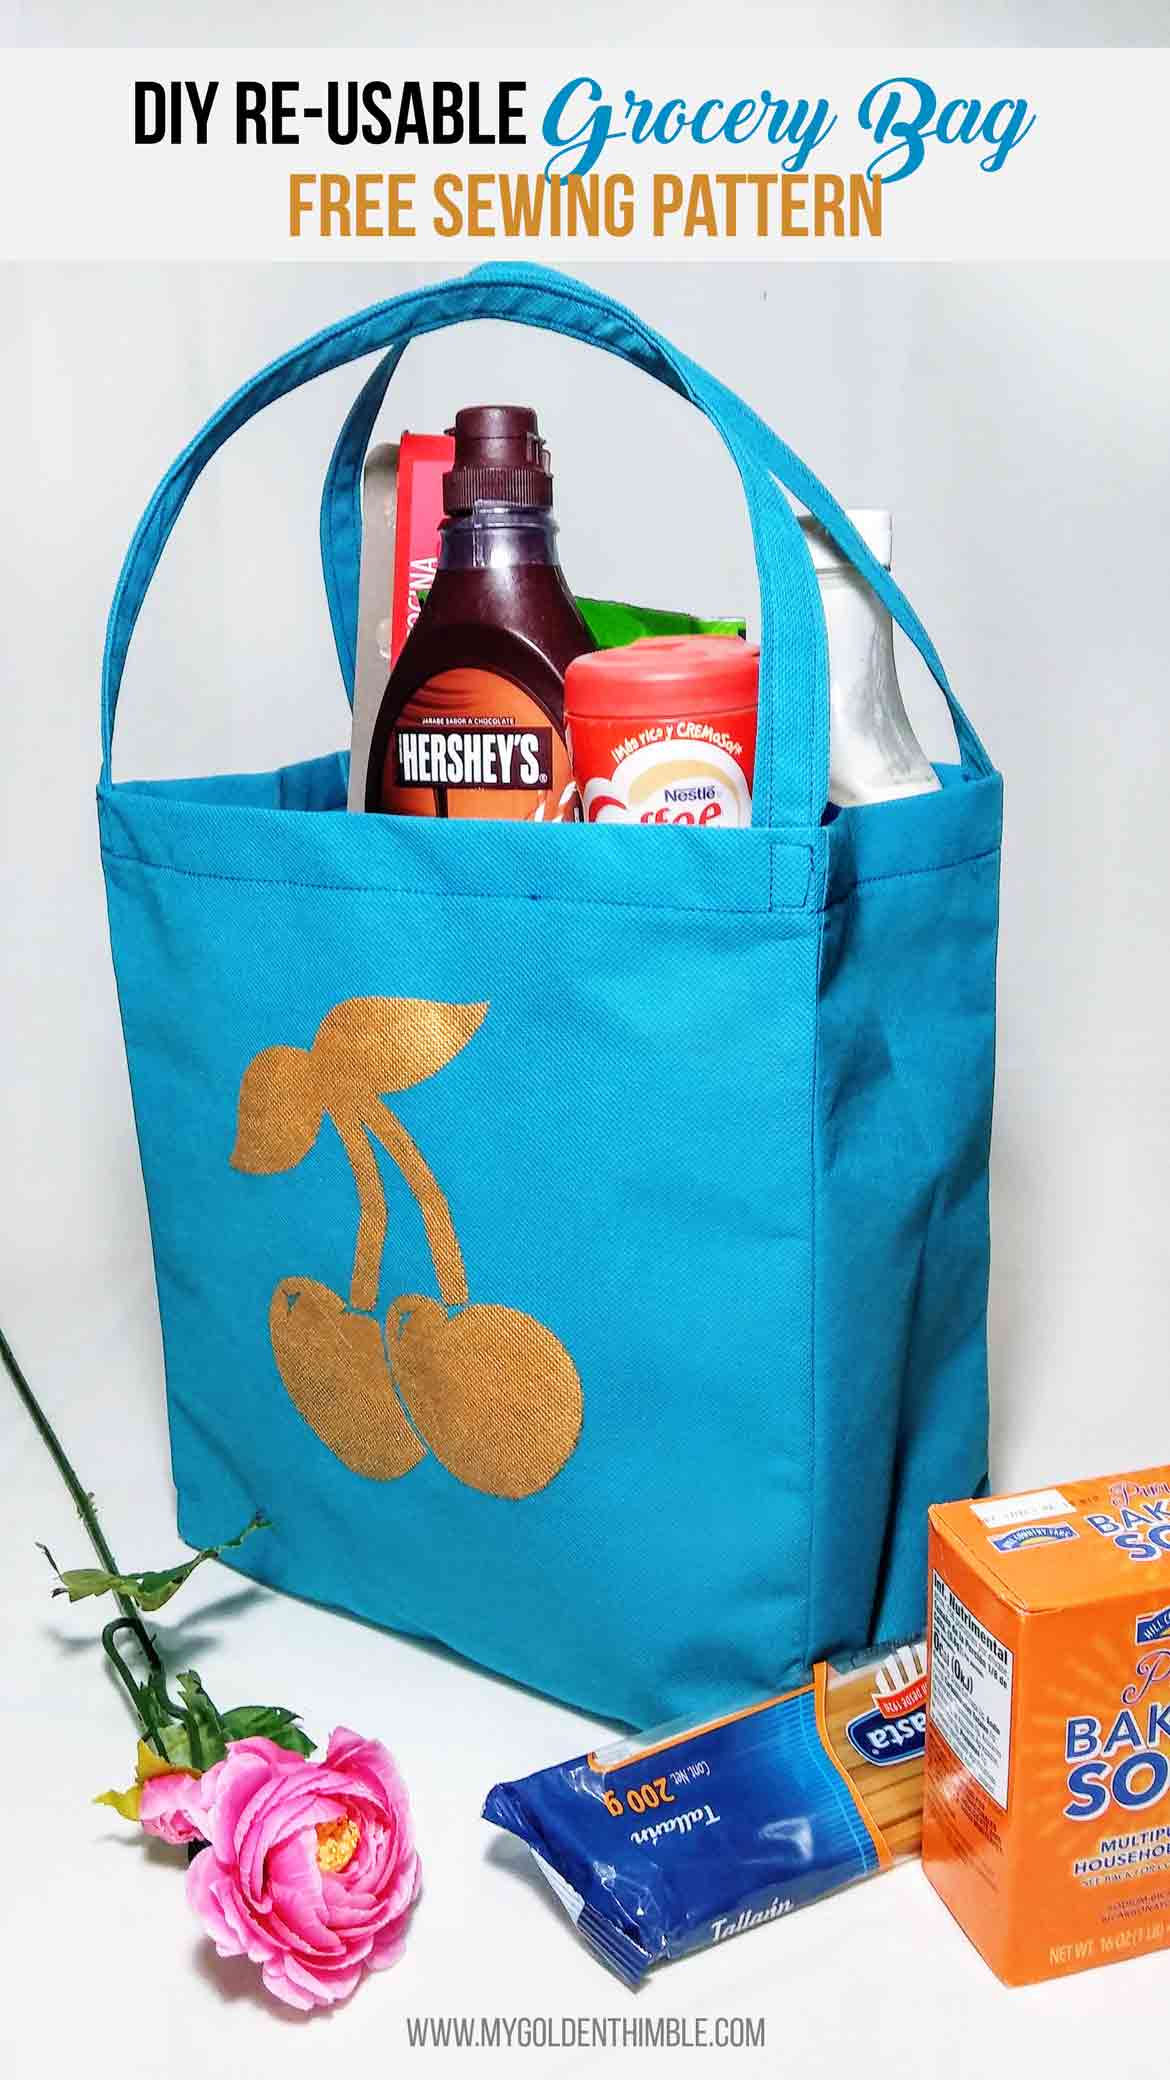 Free reusable grocery bag sewing pattern 15 exquisite DIY reusable grocery bags